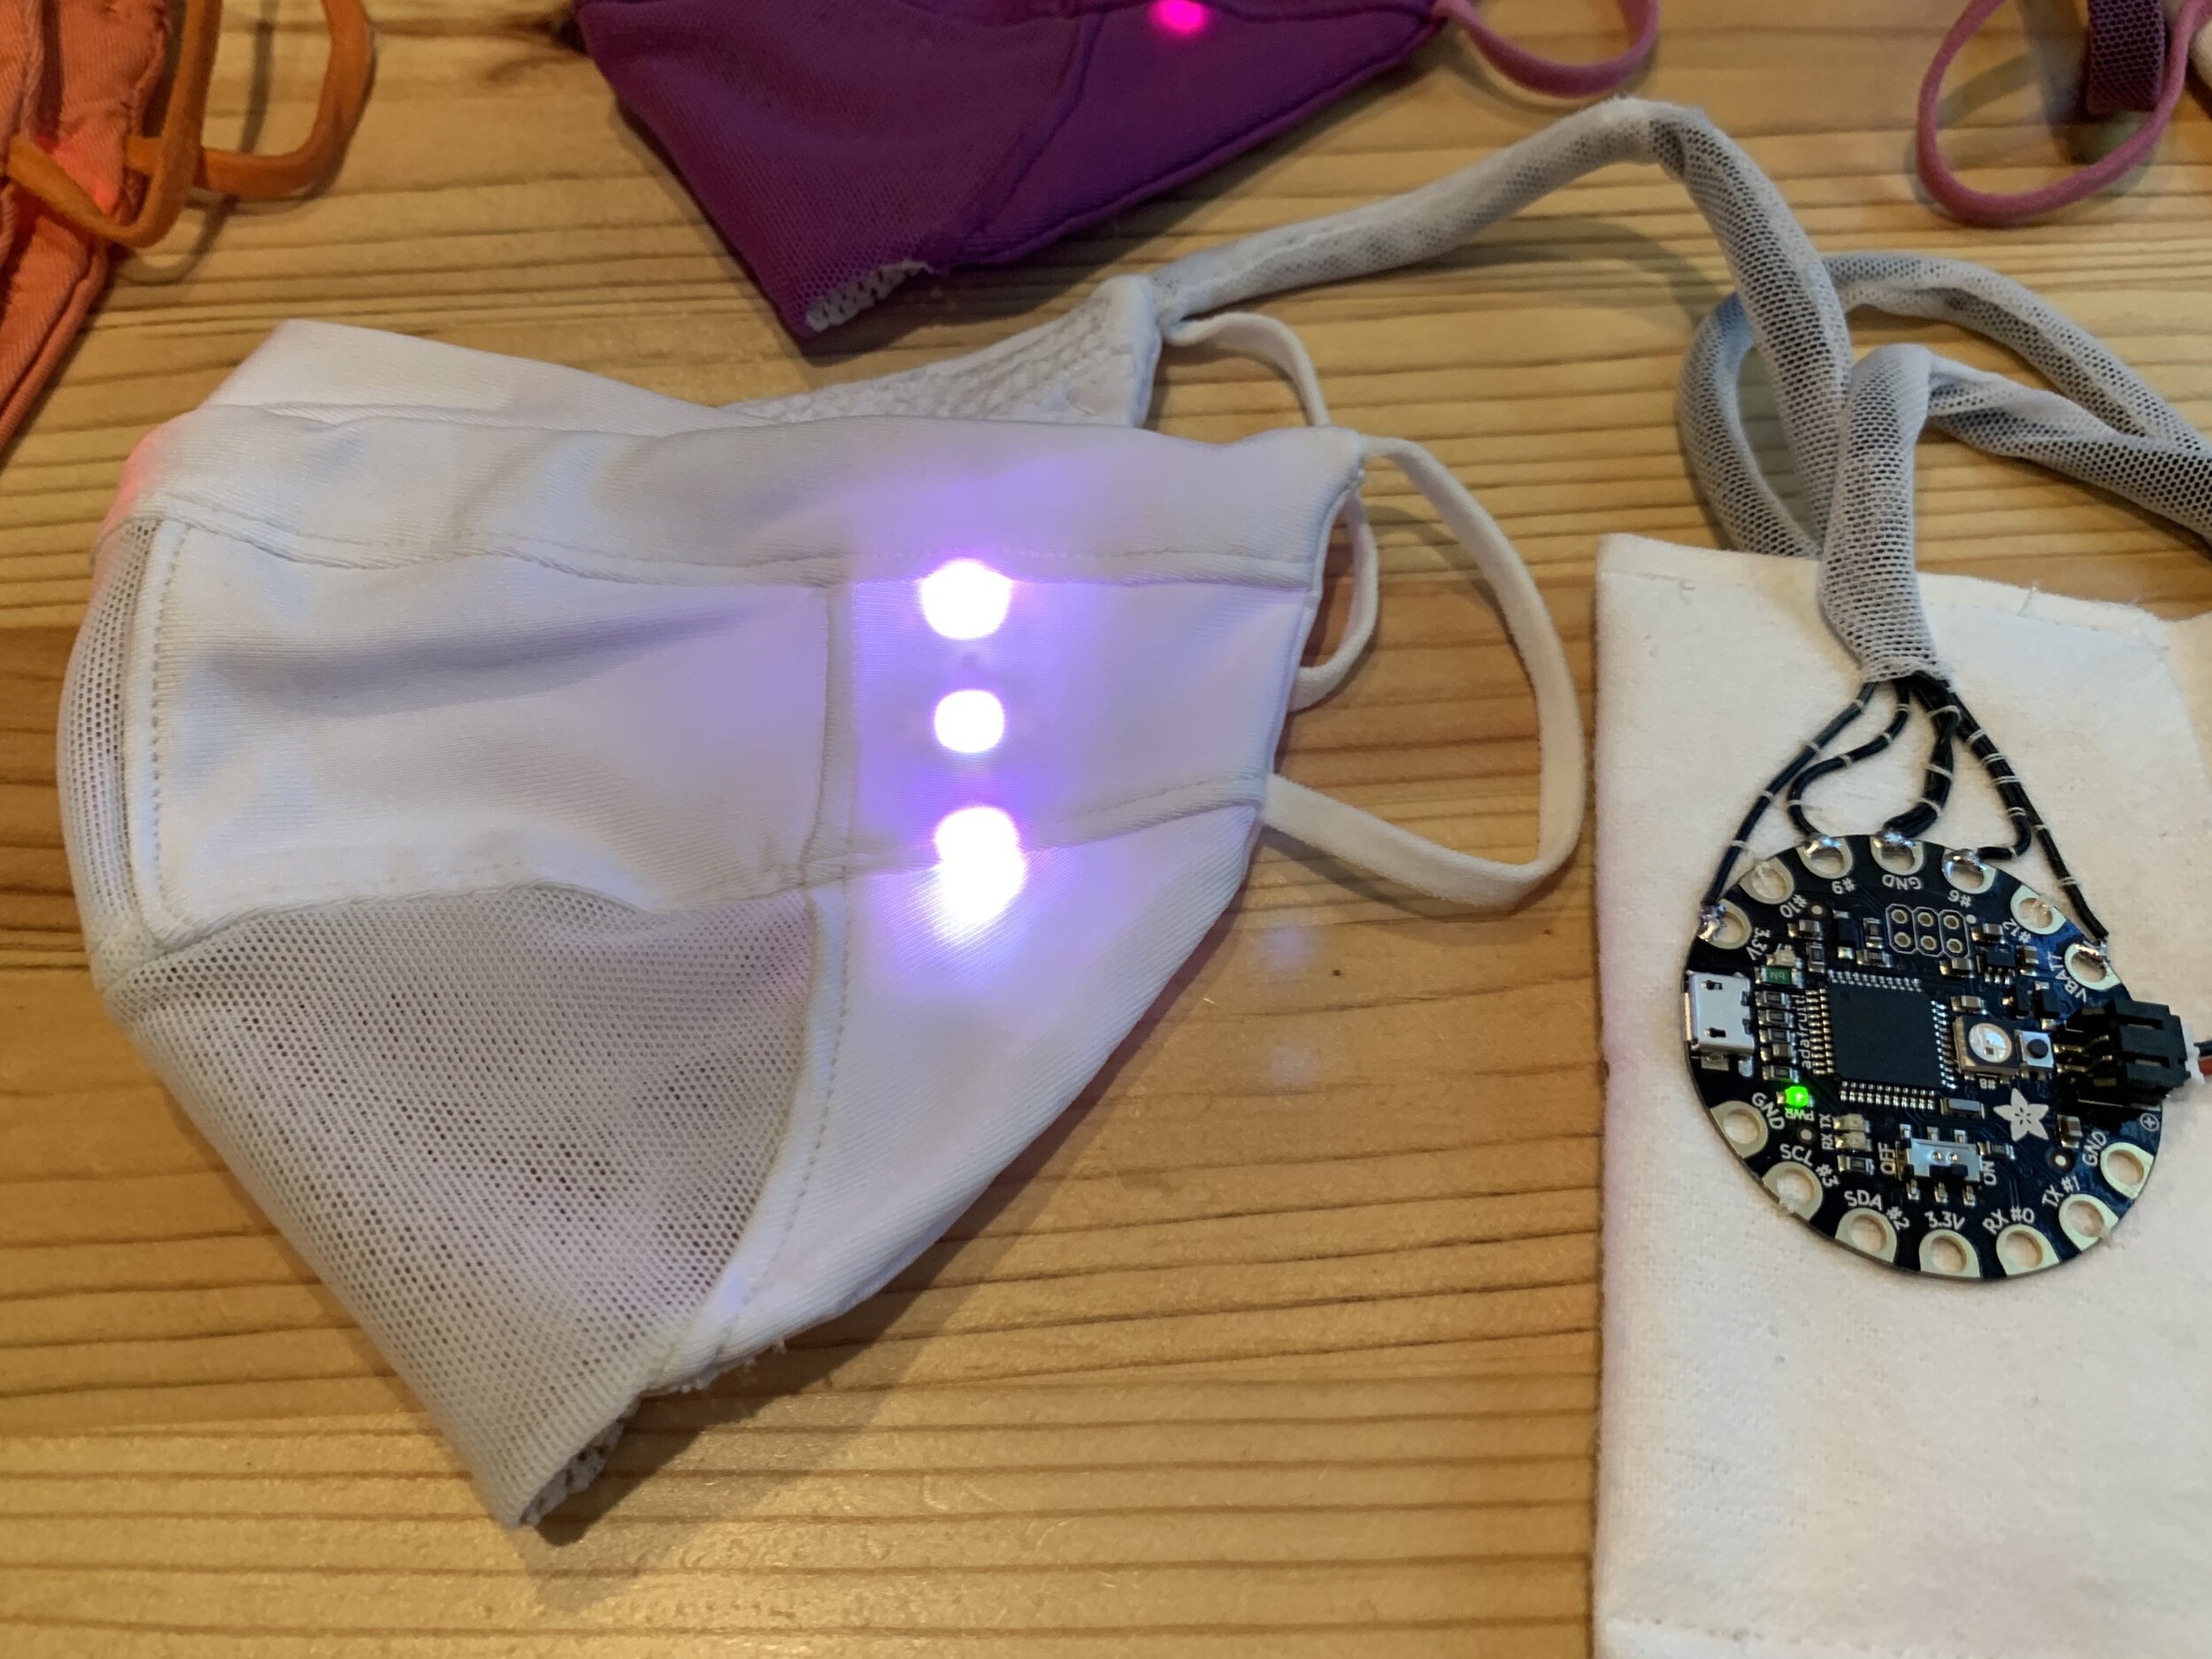 The LEDs responding to sound, and a view of the microcontroller